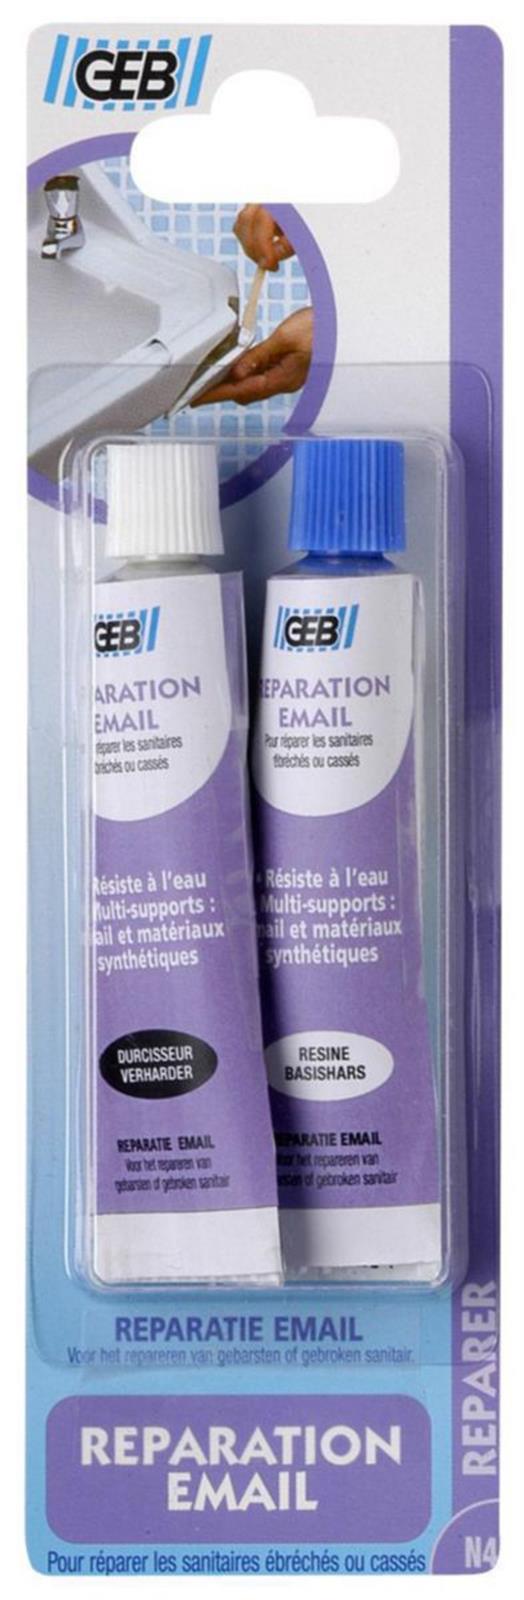 REPARATION EMAIL - REPARATION EMAIL 2 TUBES 20GR